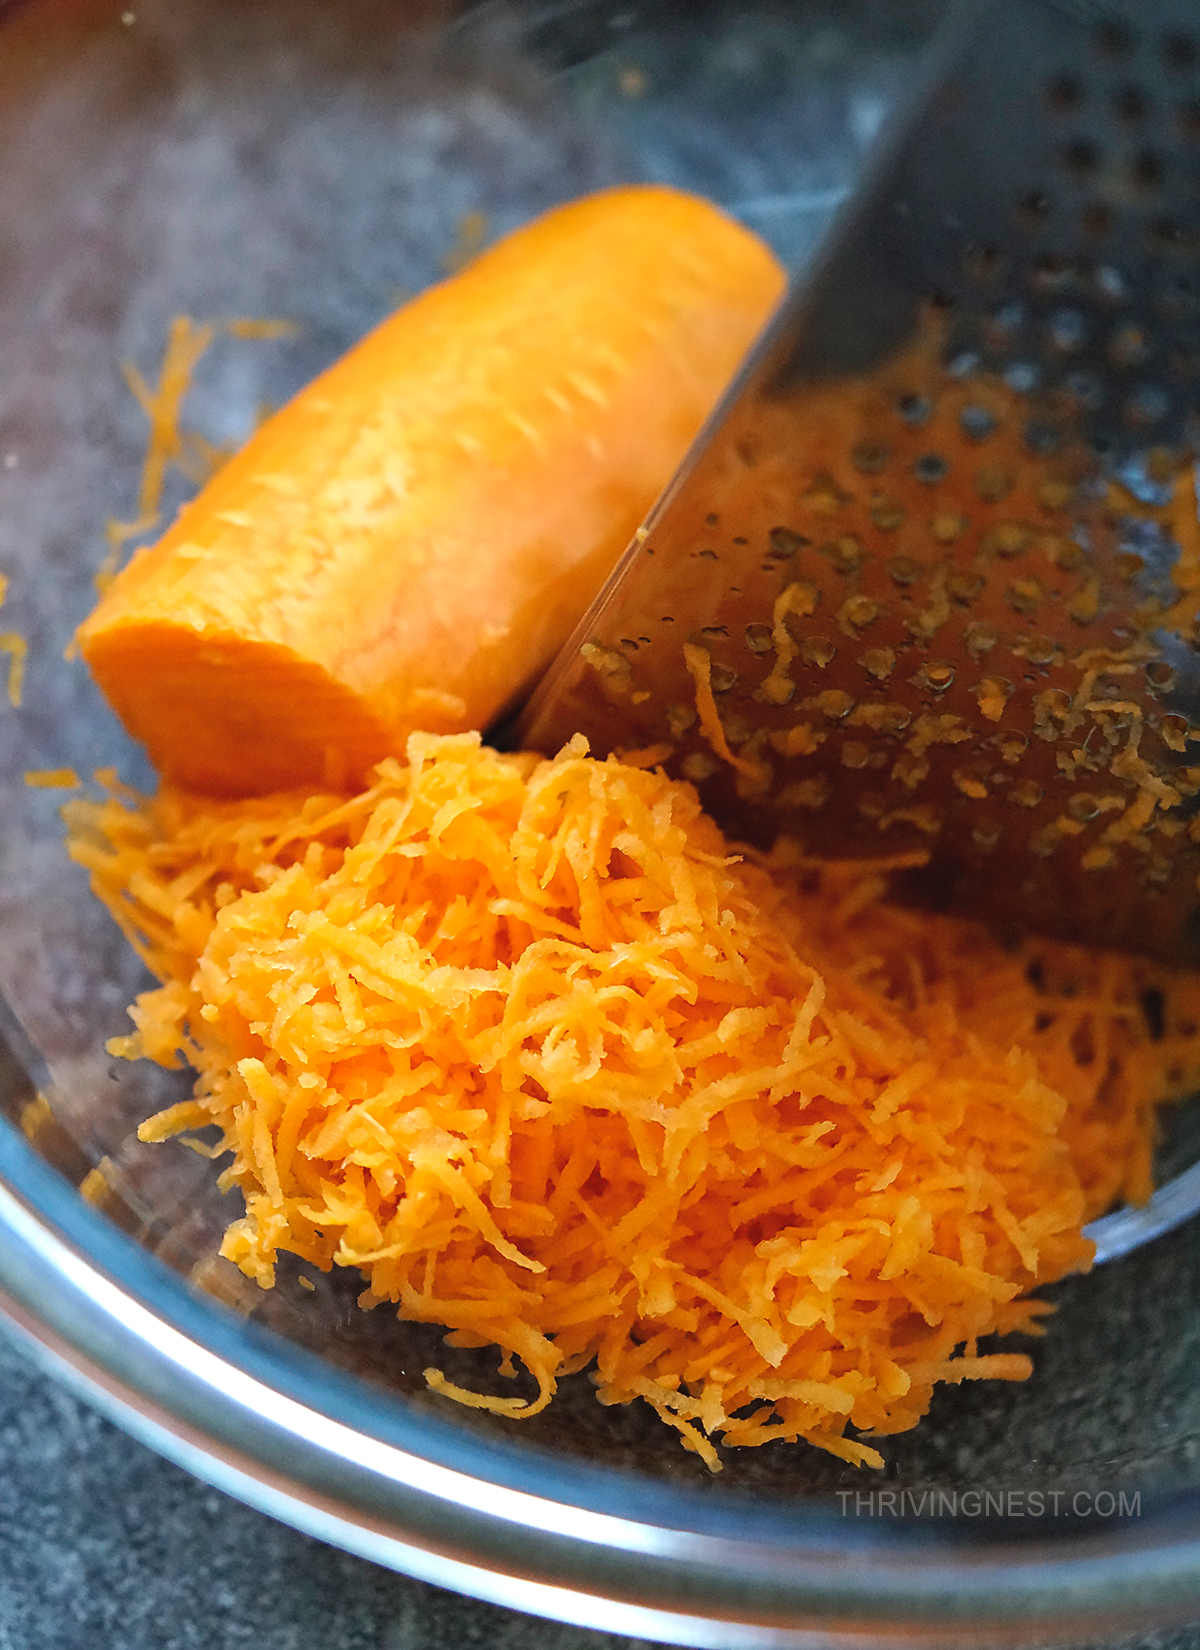 Grated carrot ready for making cookies.